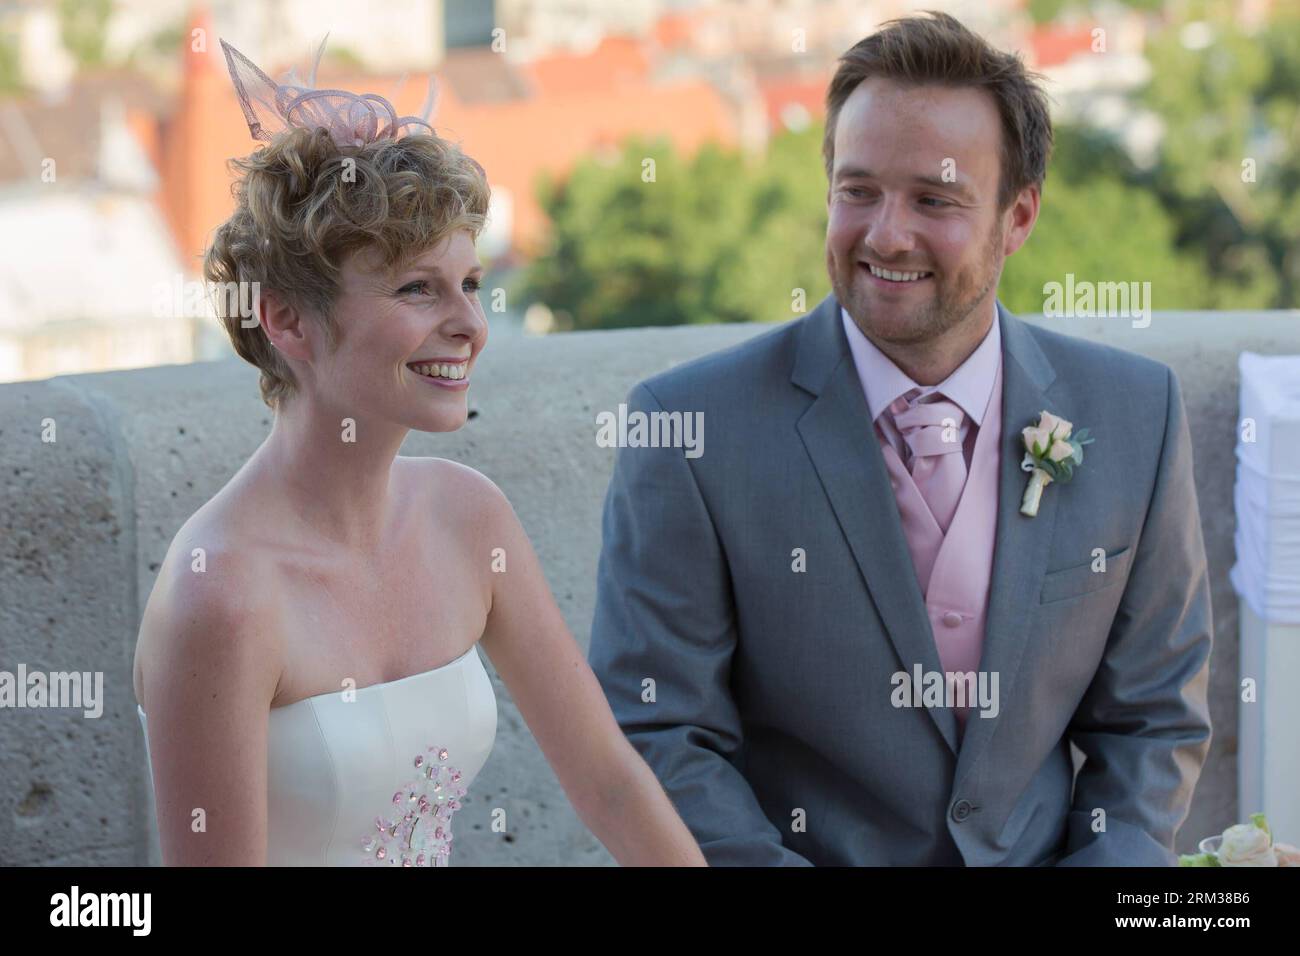 https://c8.alamy.com/comp/2RM38B6/bildnummer-60099278-datum-09072013-copyright-imagoxinhua-130710-budapest-xinhua-wedding-tourists-lisa-gant-l-and-alex-pelling-from-england-hold-their-53rd-wedding-in-budapest-hungary-on-july-9-2013-the-couple-tours-the-world-in-search-of-the-best-wedding-location-and-performs-new-wedding-ceremonies-in-various-locations-xinhuaattila-volgyi-srb-hungary-budapest-england-wedding-tourists-publicationxnotxinxchn-wirtschaft-gesellschaft-tourismus-hochzeit-x0x-xdd-2013-quer-60099278-date-09-07-2013-copyright-imago-xinhua-budapest-xinhua-wedding-tourists-lisa-gant-l-2RM38B6.jpg